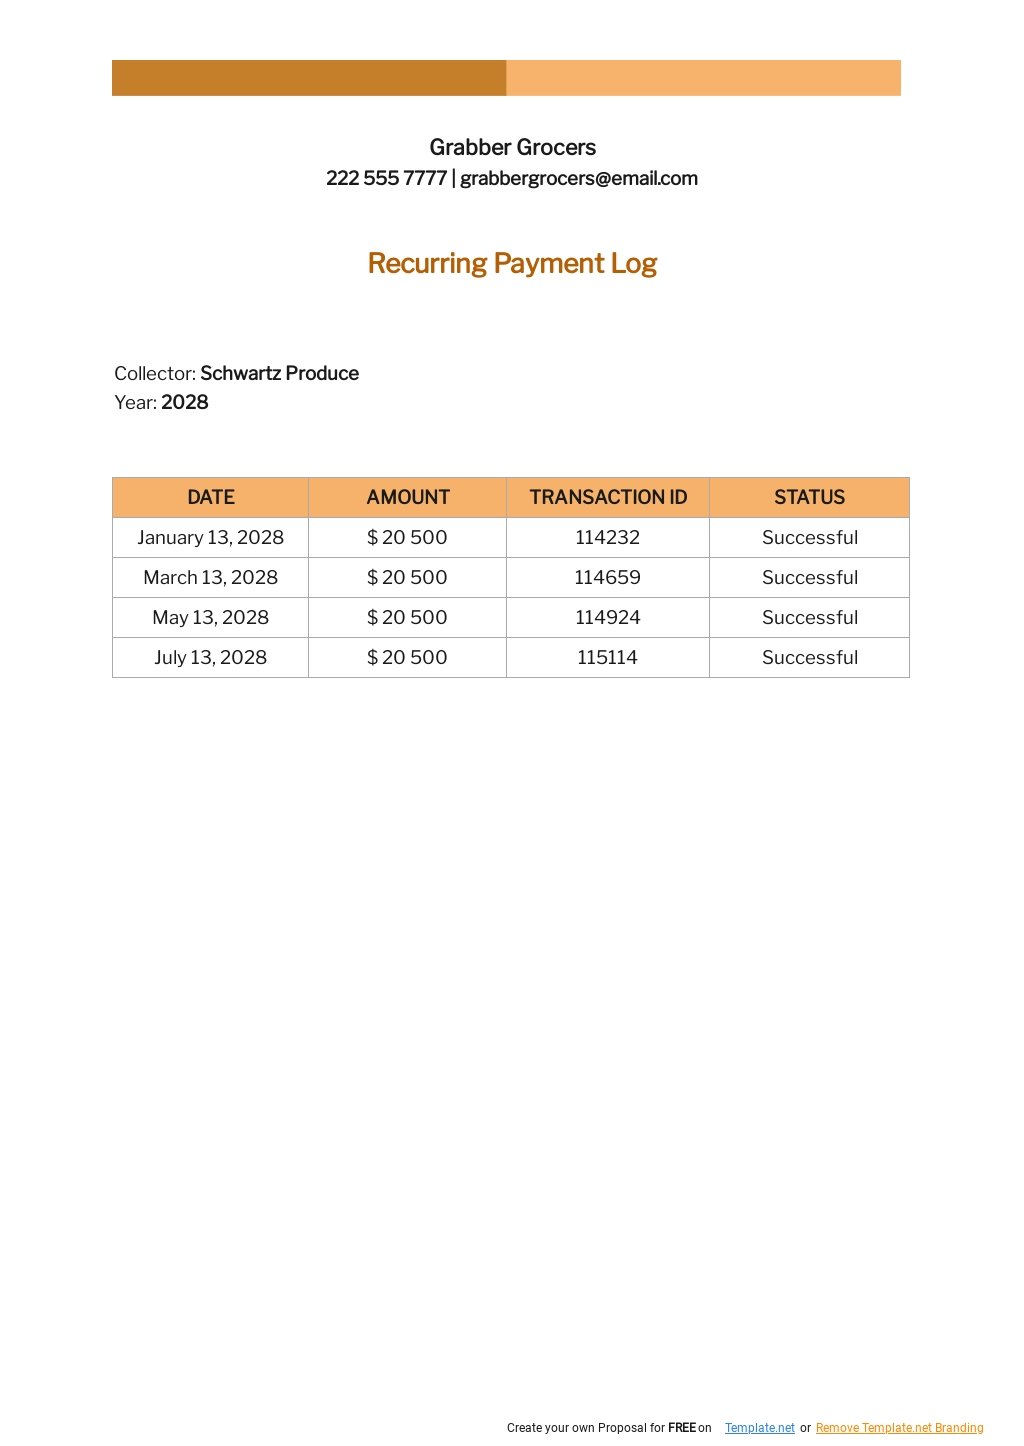 Recurring Payment Log Template